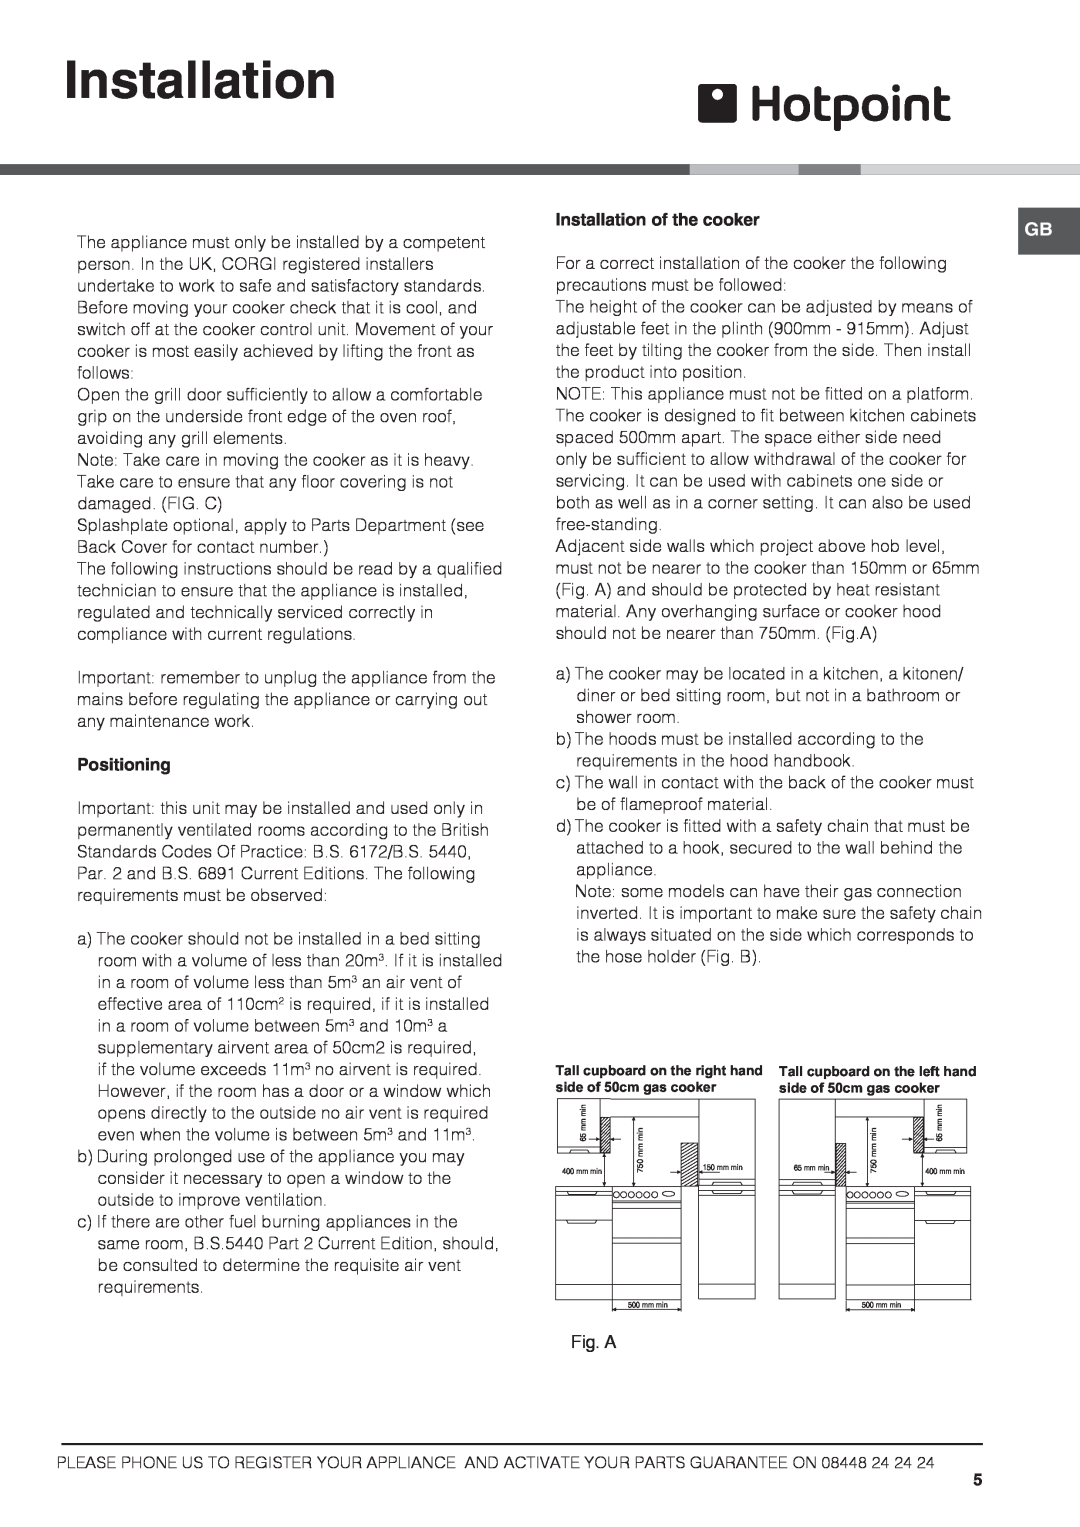 Hotpoint 50cm Gas Cooker, HAGL 51 P, HAGL 51 K installation instructions Positioning, Installation of the cooker, Fig. A 